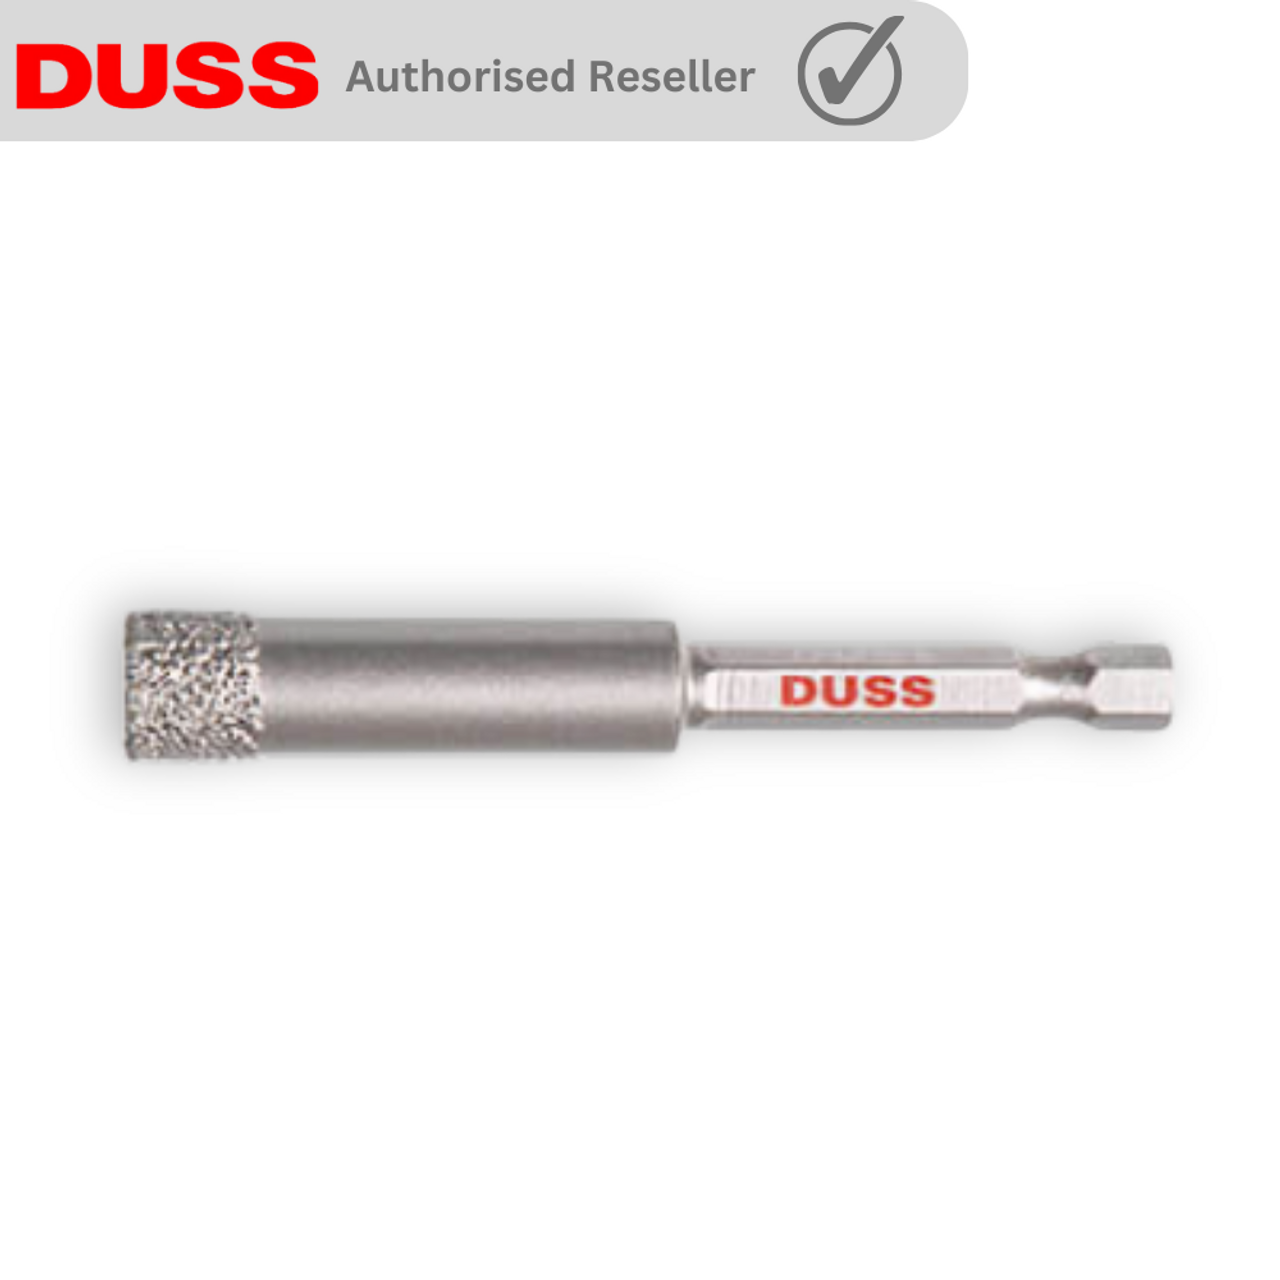 DUSS Core Drill LD Diamond with 1/4 Shank with 1/4 Shank for the Electrical Industry and Carpenters in Melbourne, Sydney and Perth